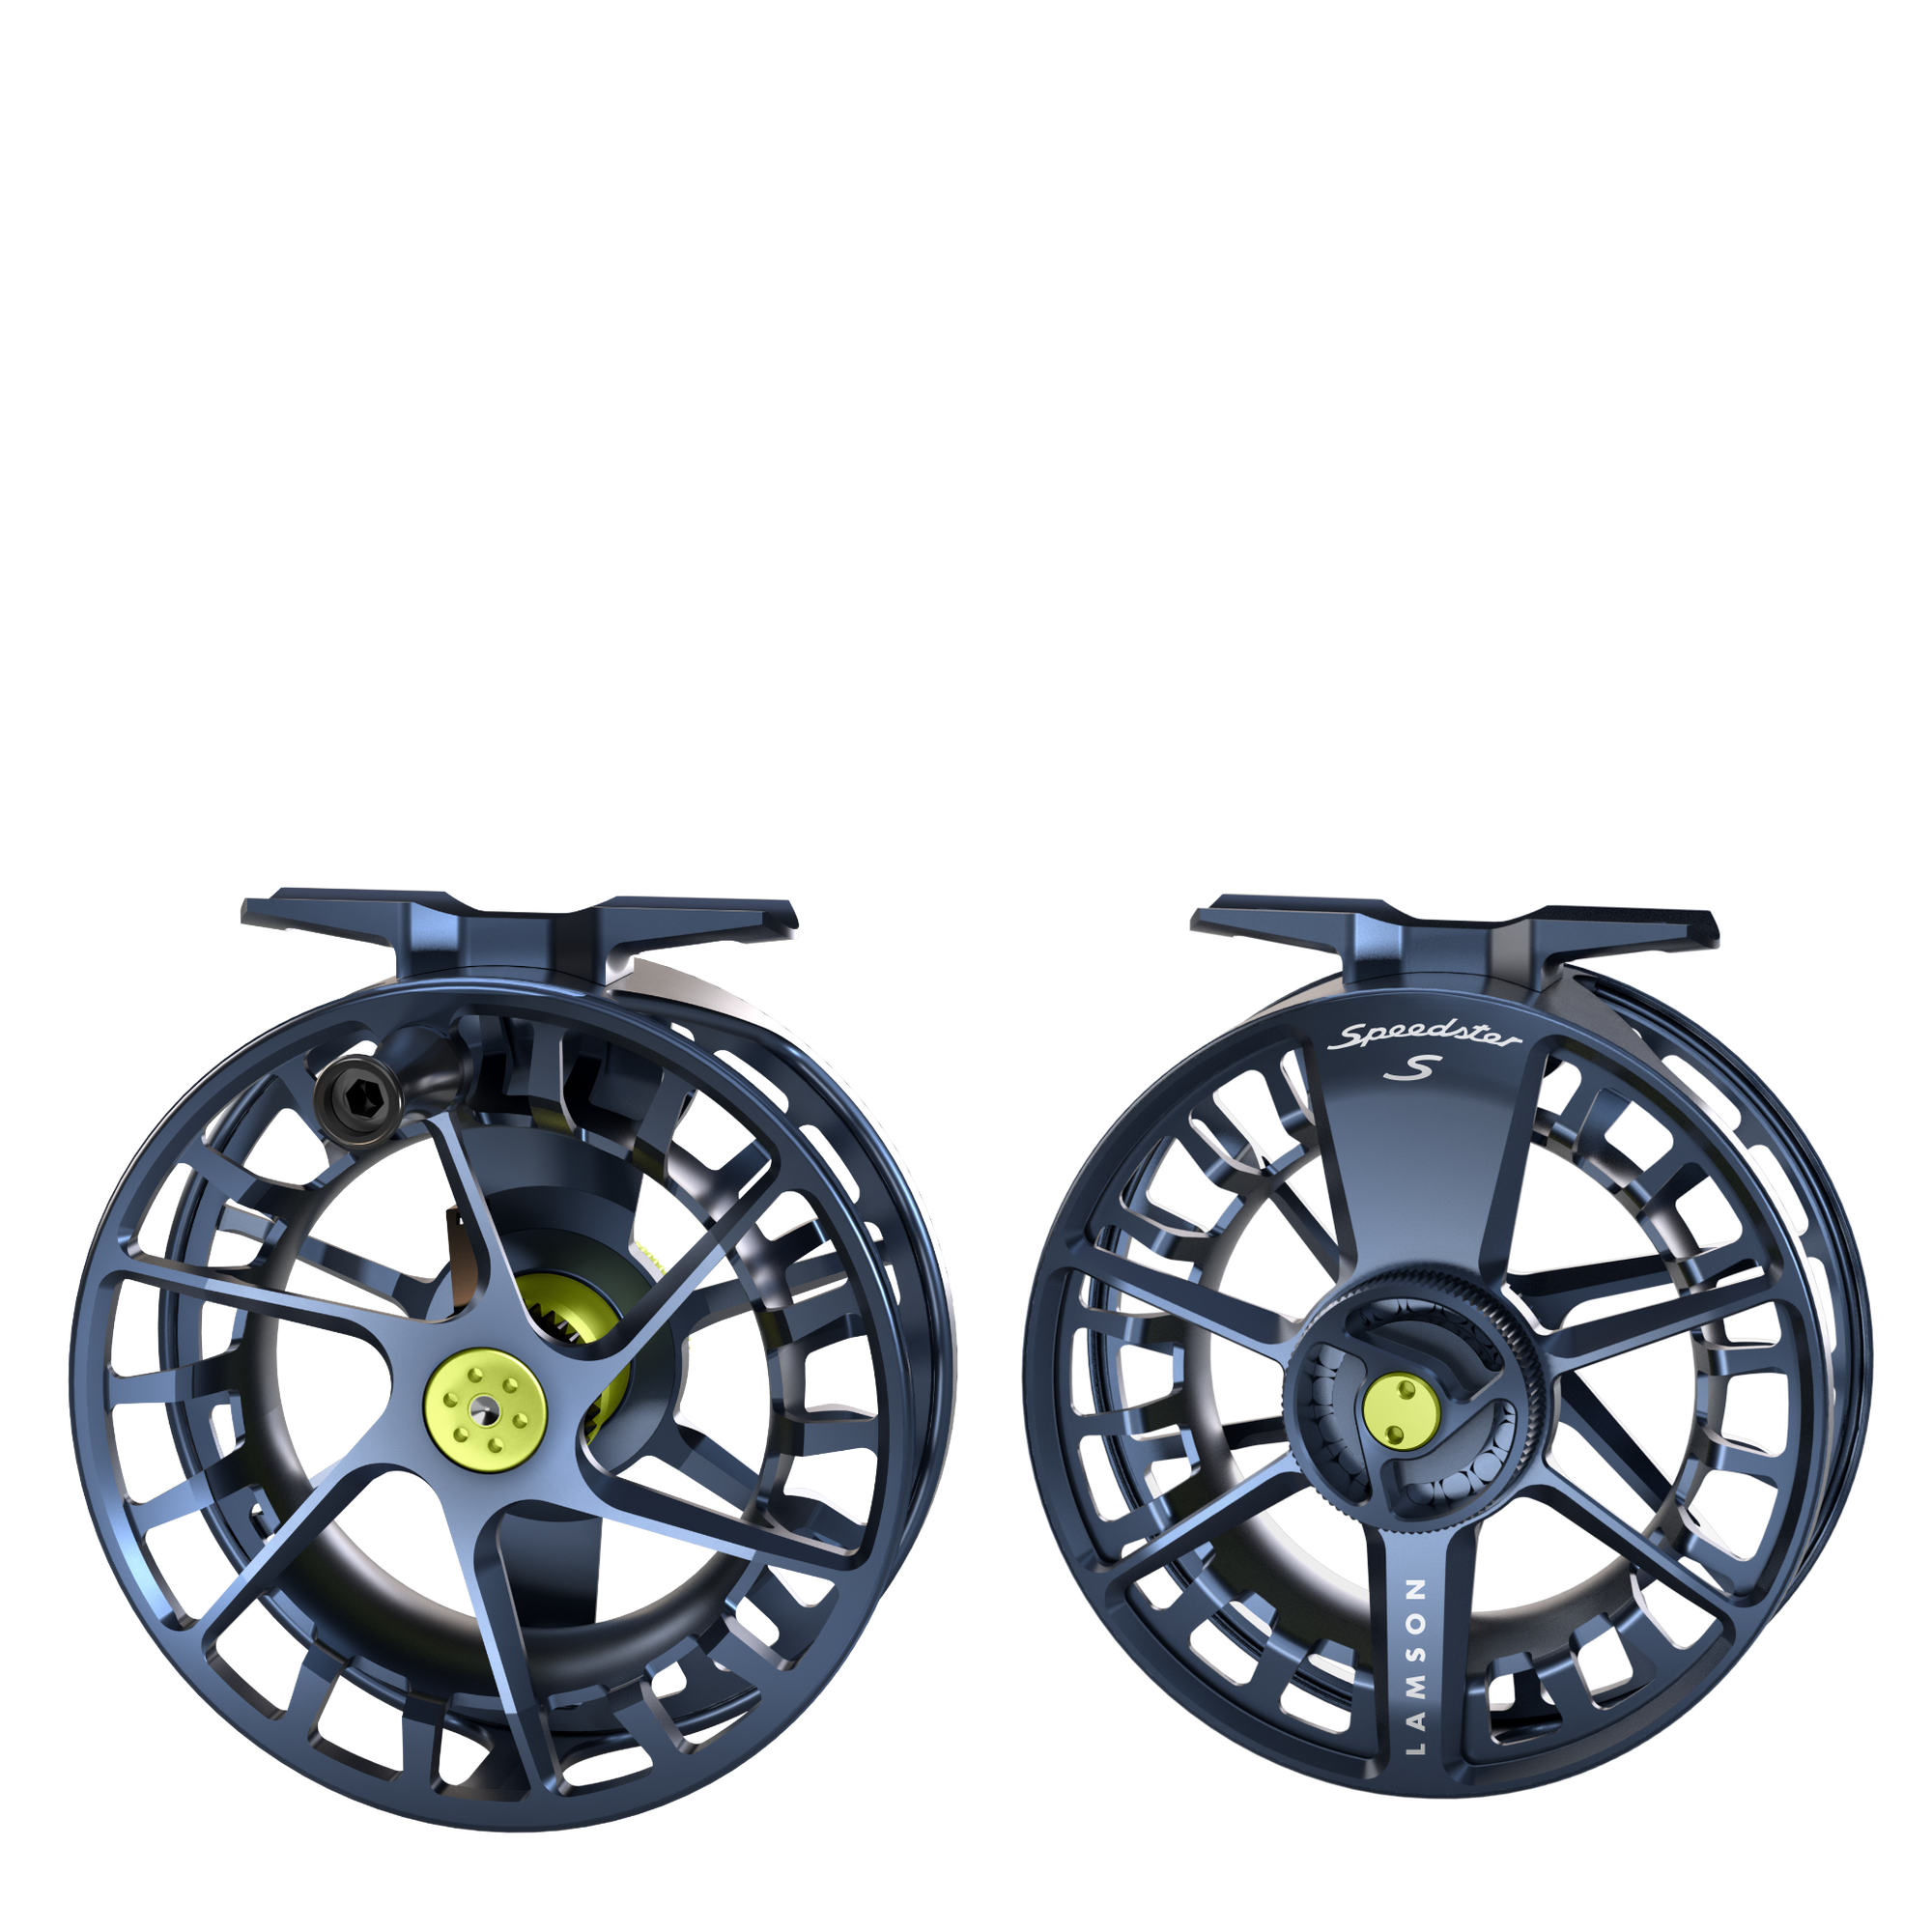 Waterworks Lamson Speedster S Reels - Iron Bow Fly Shop